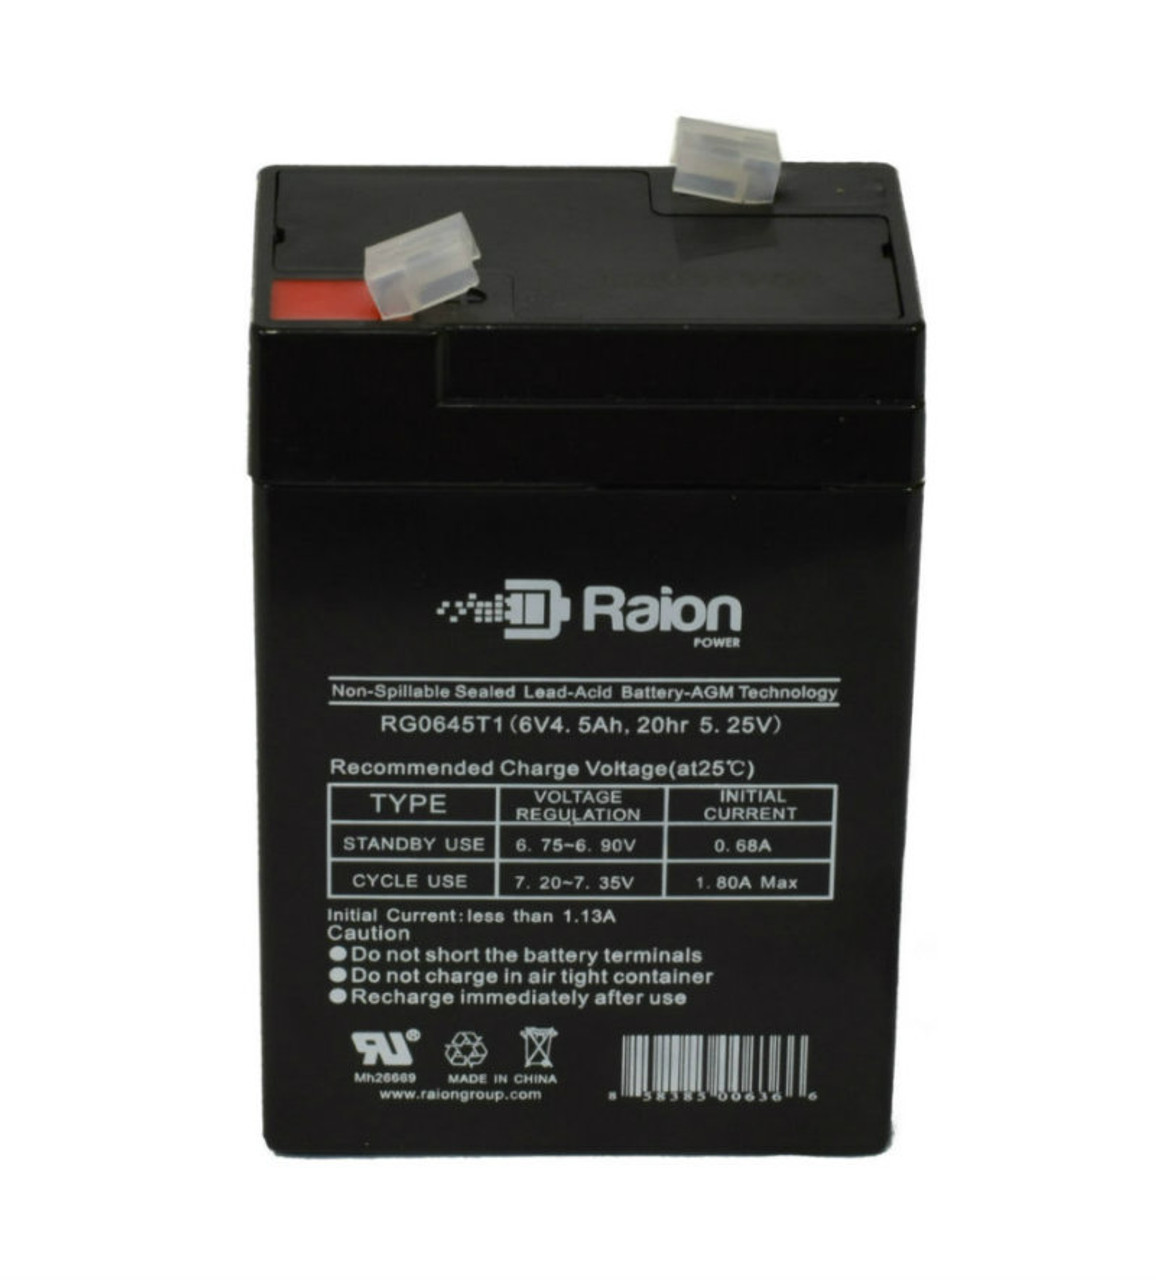 Raion Power RG0645T1 Replacement Battery Cartridge for Sentry Lite 640